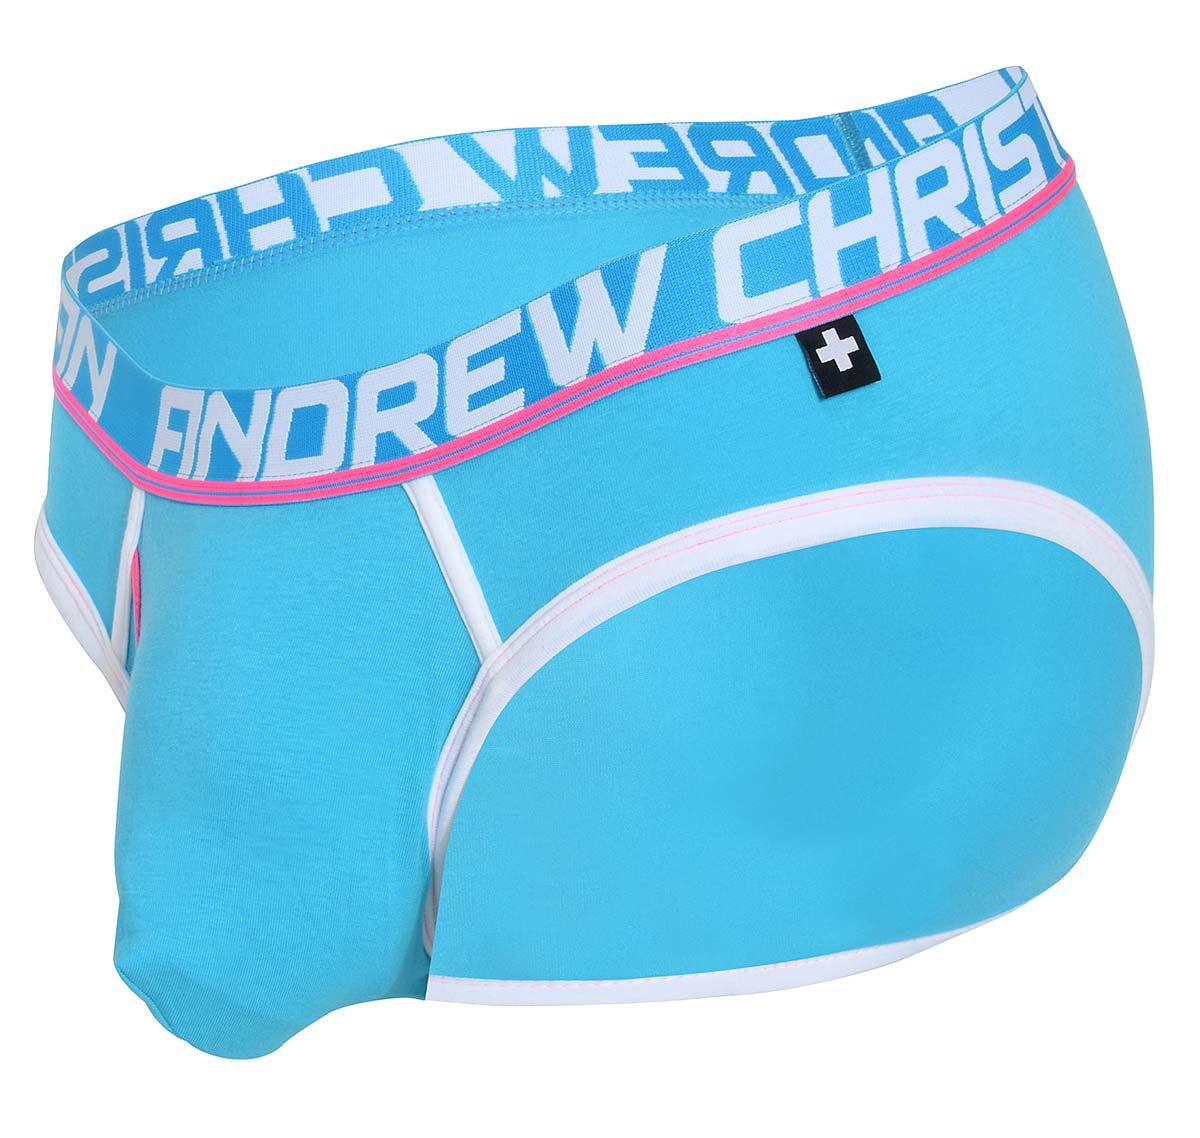 Andrew Christian Slip FLY TAGLESS BRIEF w/ ALMOST NAKED 92049, azul